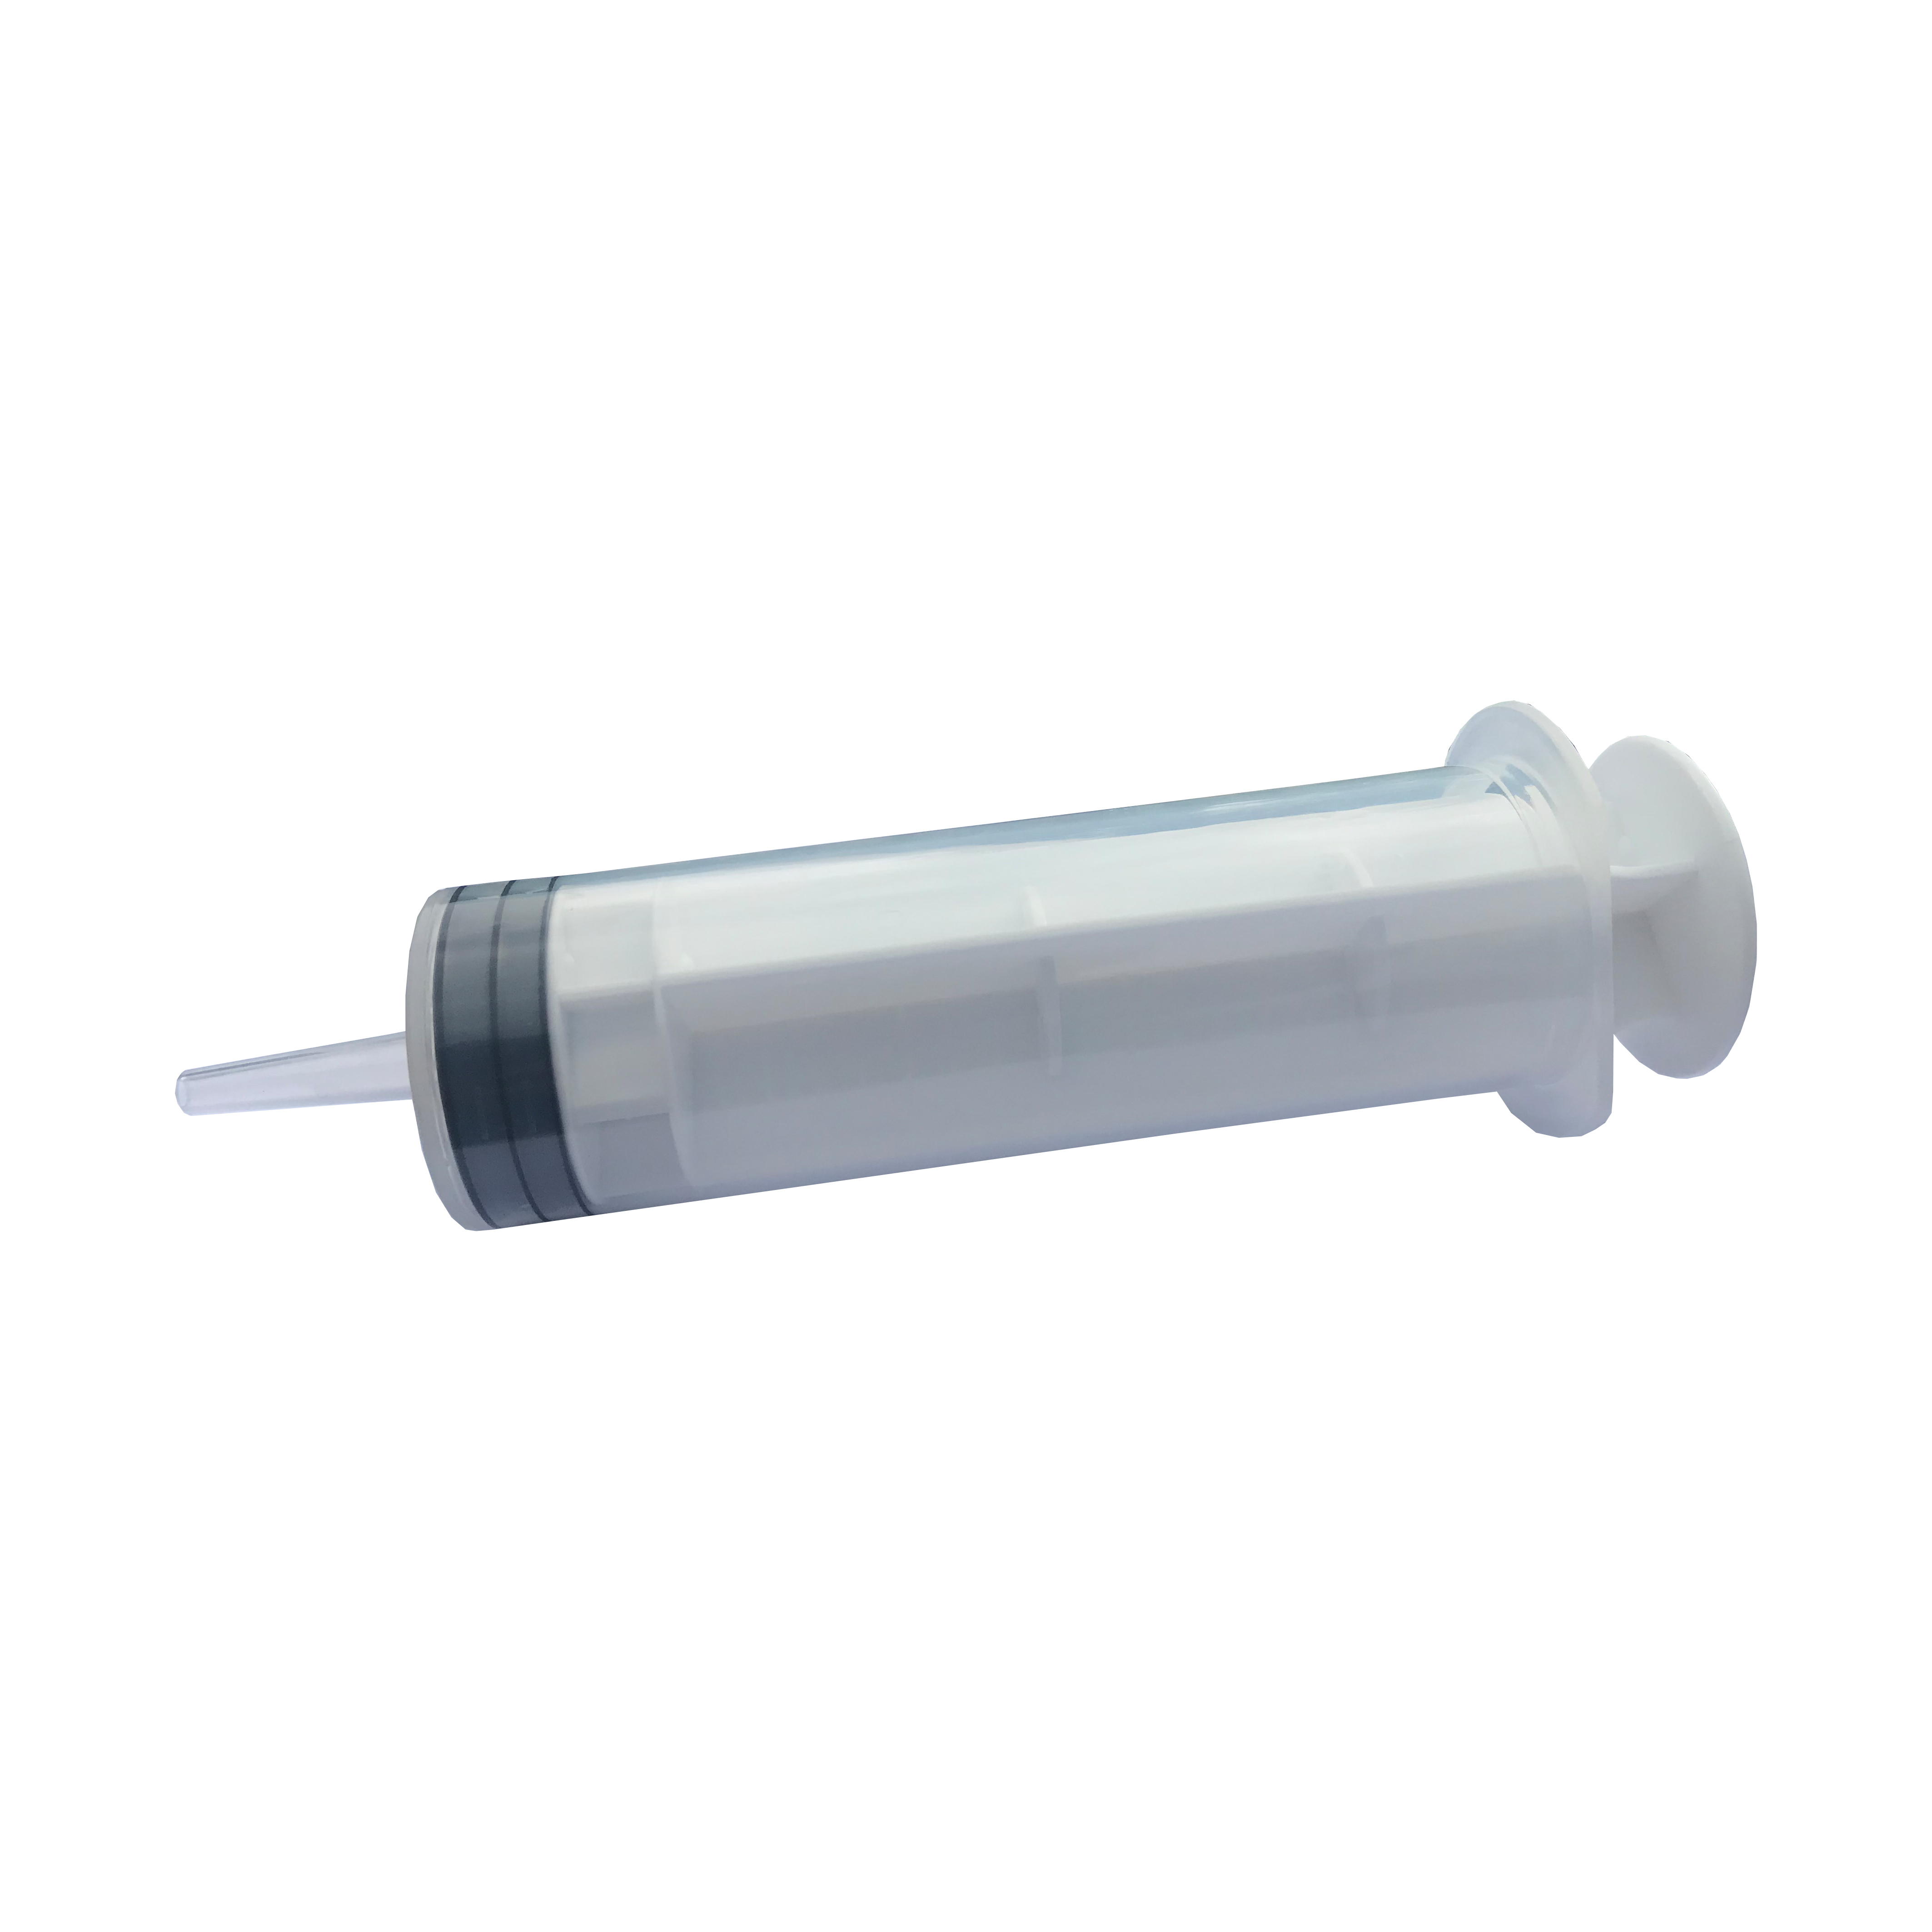 3SYR200ML-LT Romed 3-part syringes 200ml, catheter tip, sterile per piece, 10 pcs in an inner box, 10 x 10 pcs = 100 pcs in a carton.

Luer lock tip available on request.